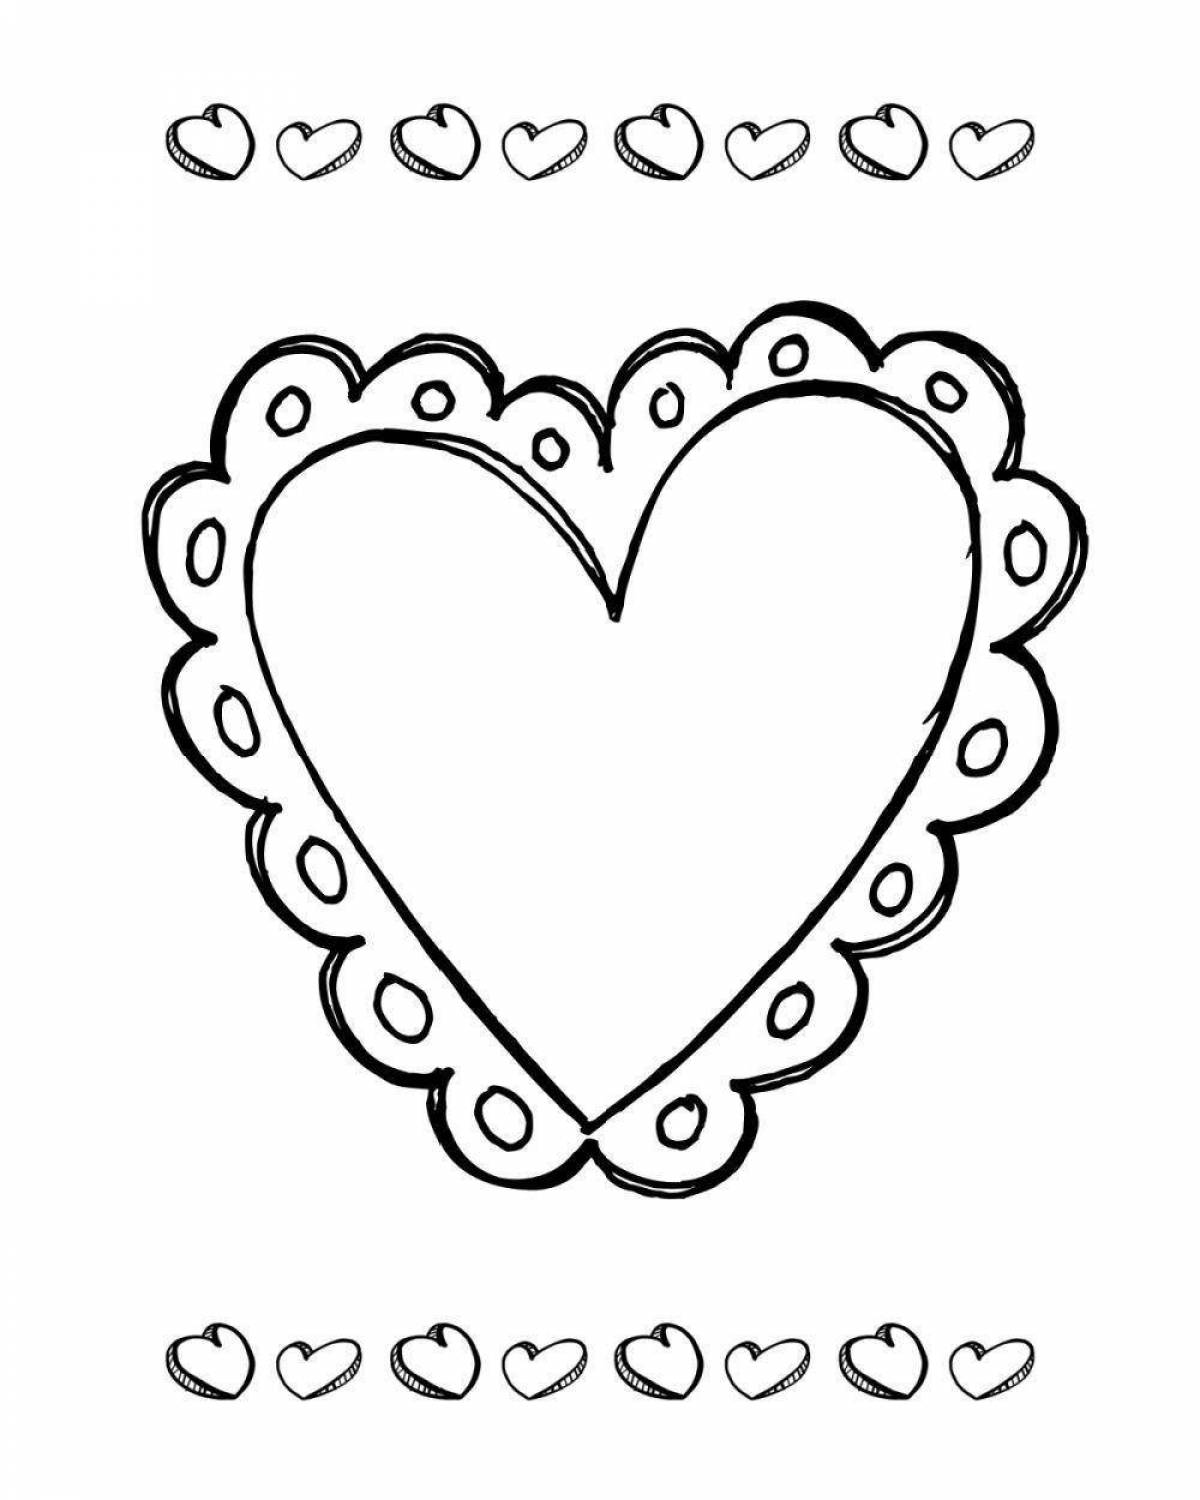 Sparkling heart and star coloring page